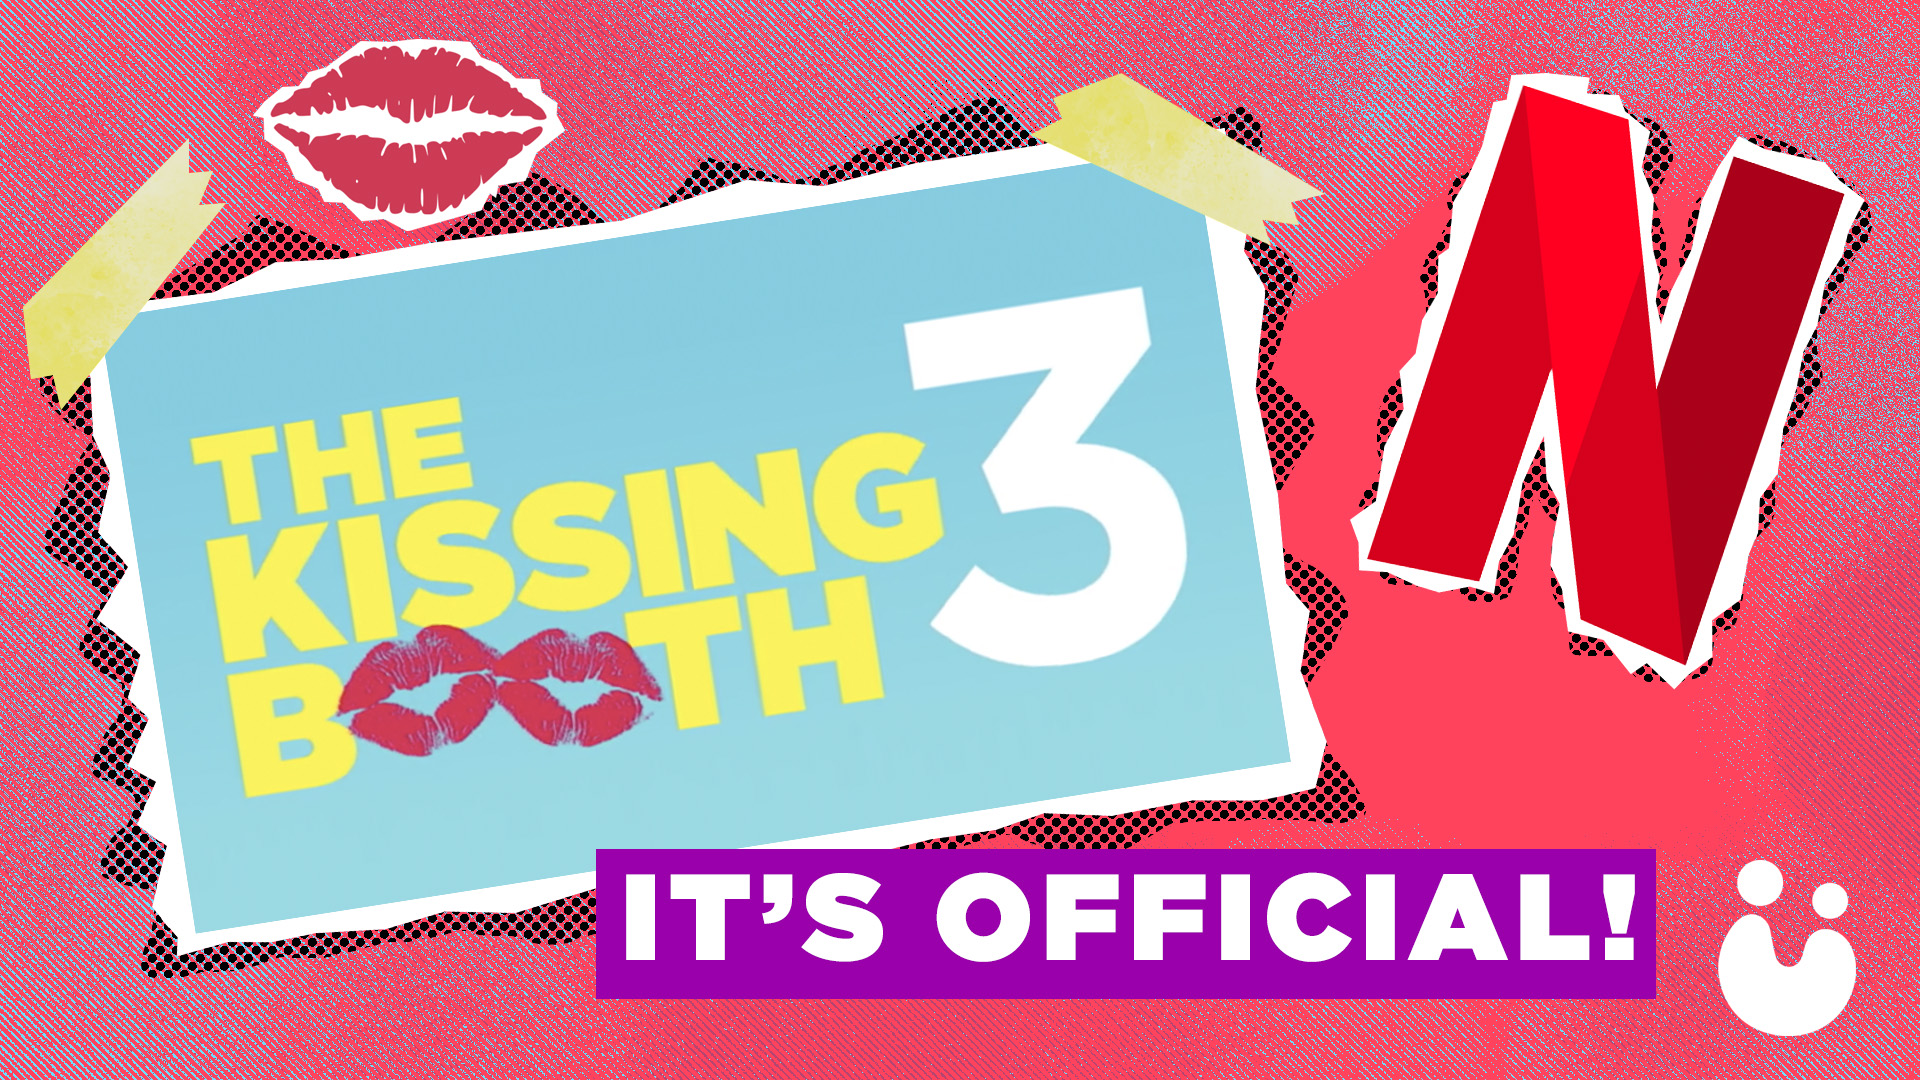 Netflix Announces 'The Kissing Booth 3' With a Teaser